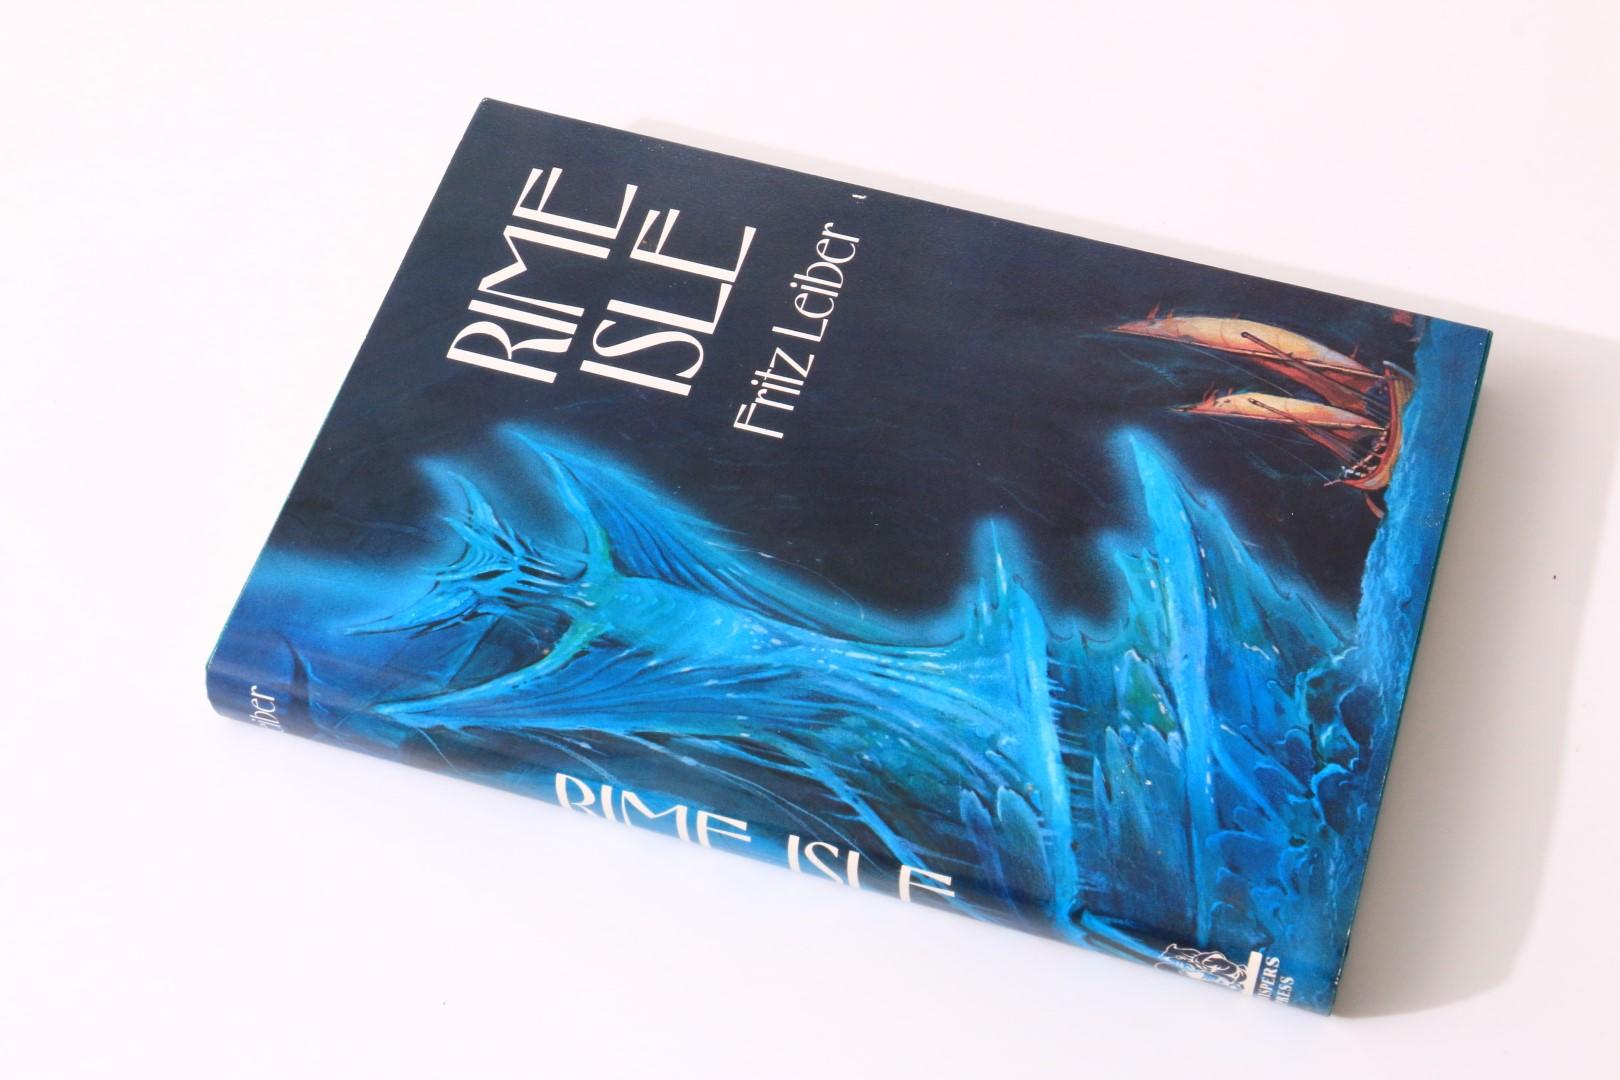 Fritz Leiber - Rime Isle - Whispers Press, 1977, Signed Limited Edition.